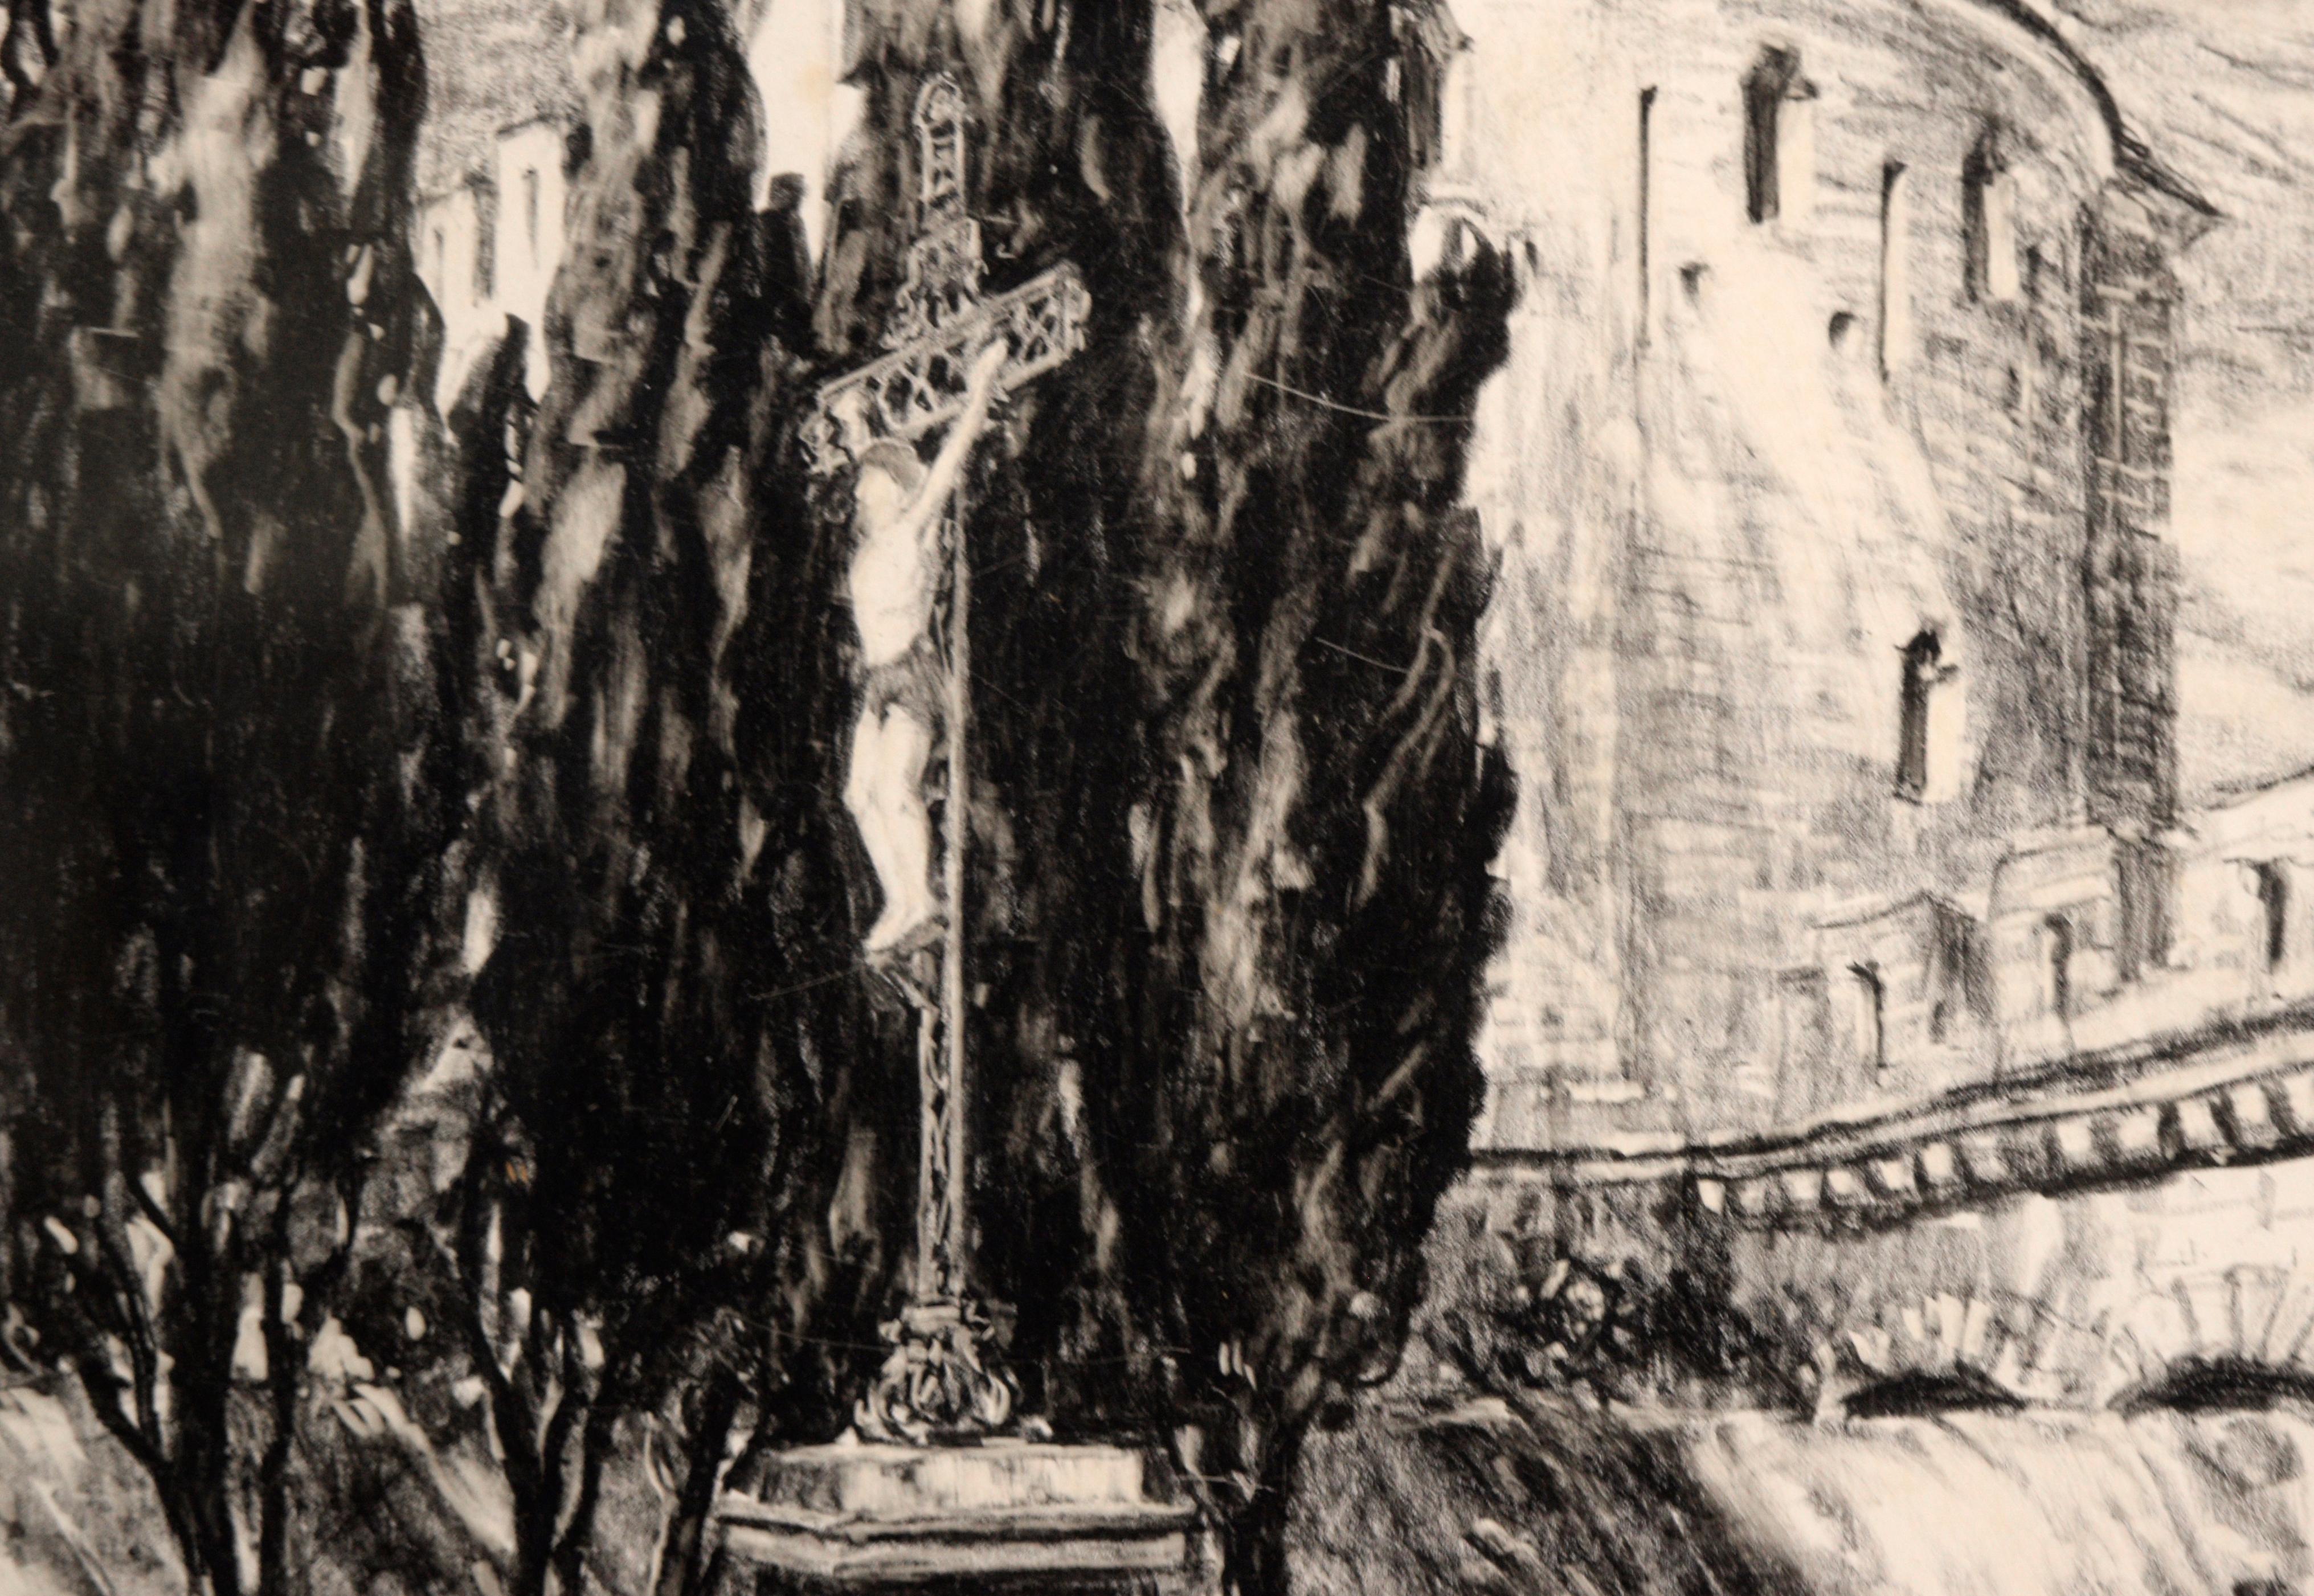 Carcassonne Citadel, France - Pastel Drawing by Charles Sumner Schneider 
Dramatic black and white pastel drawing of Carcassonne Citadel, France by Ohio artist and Architect Charles Sumner Schneider (1874-1932. This piece is bold and high-contrast,